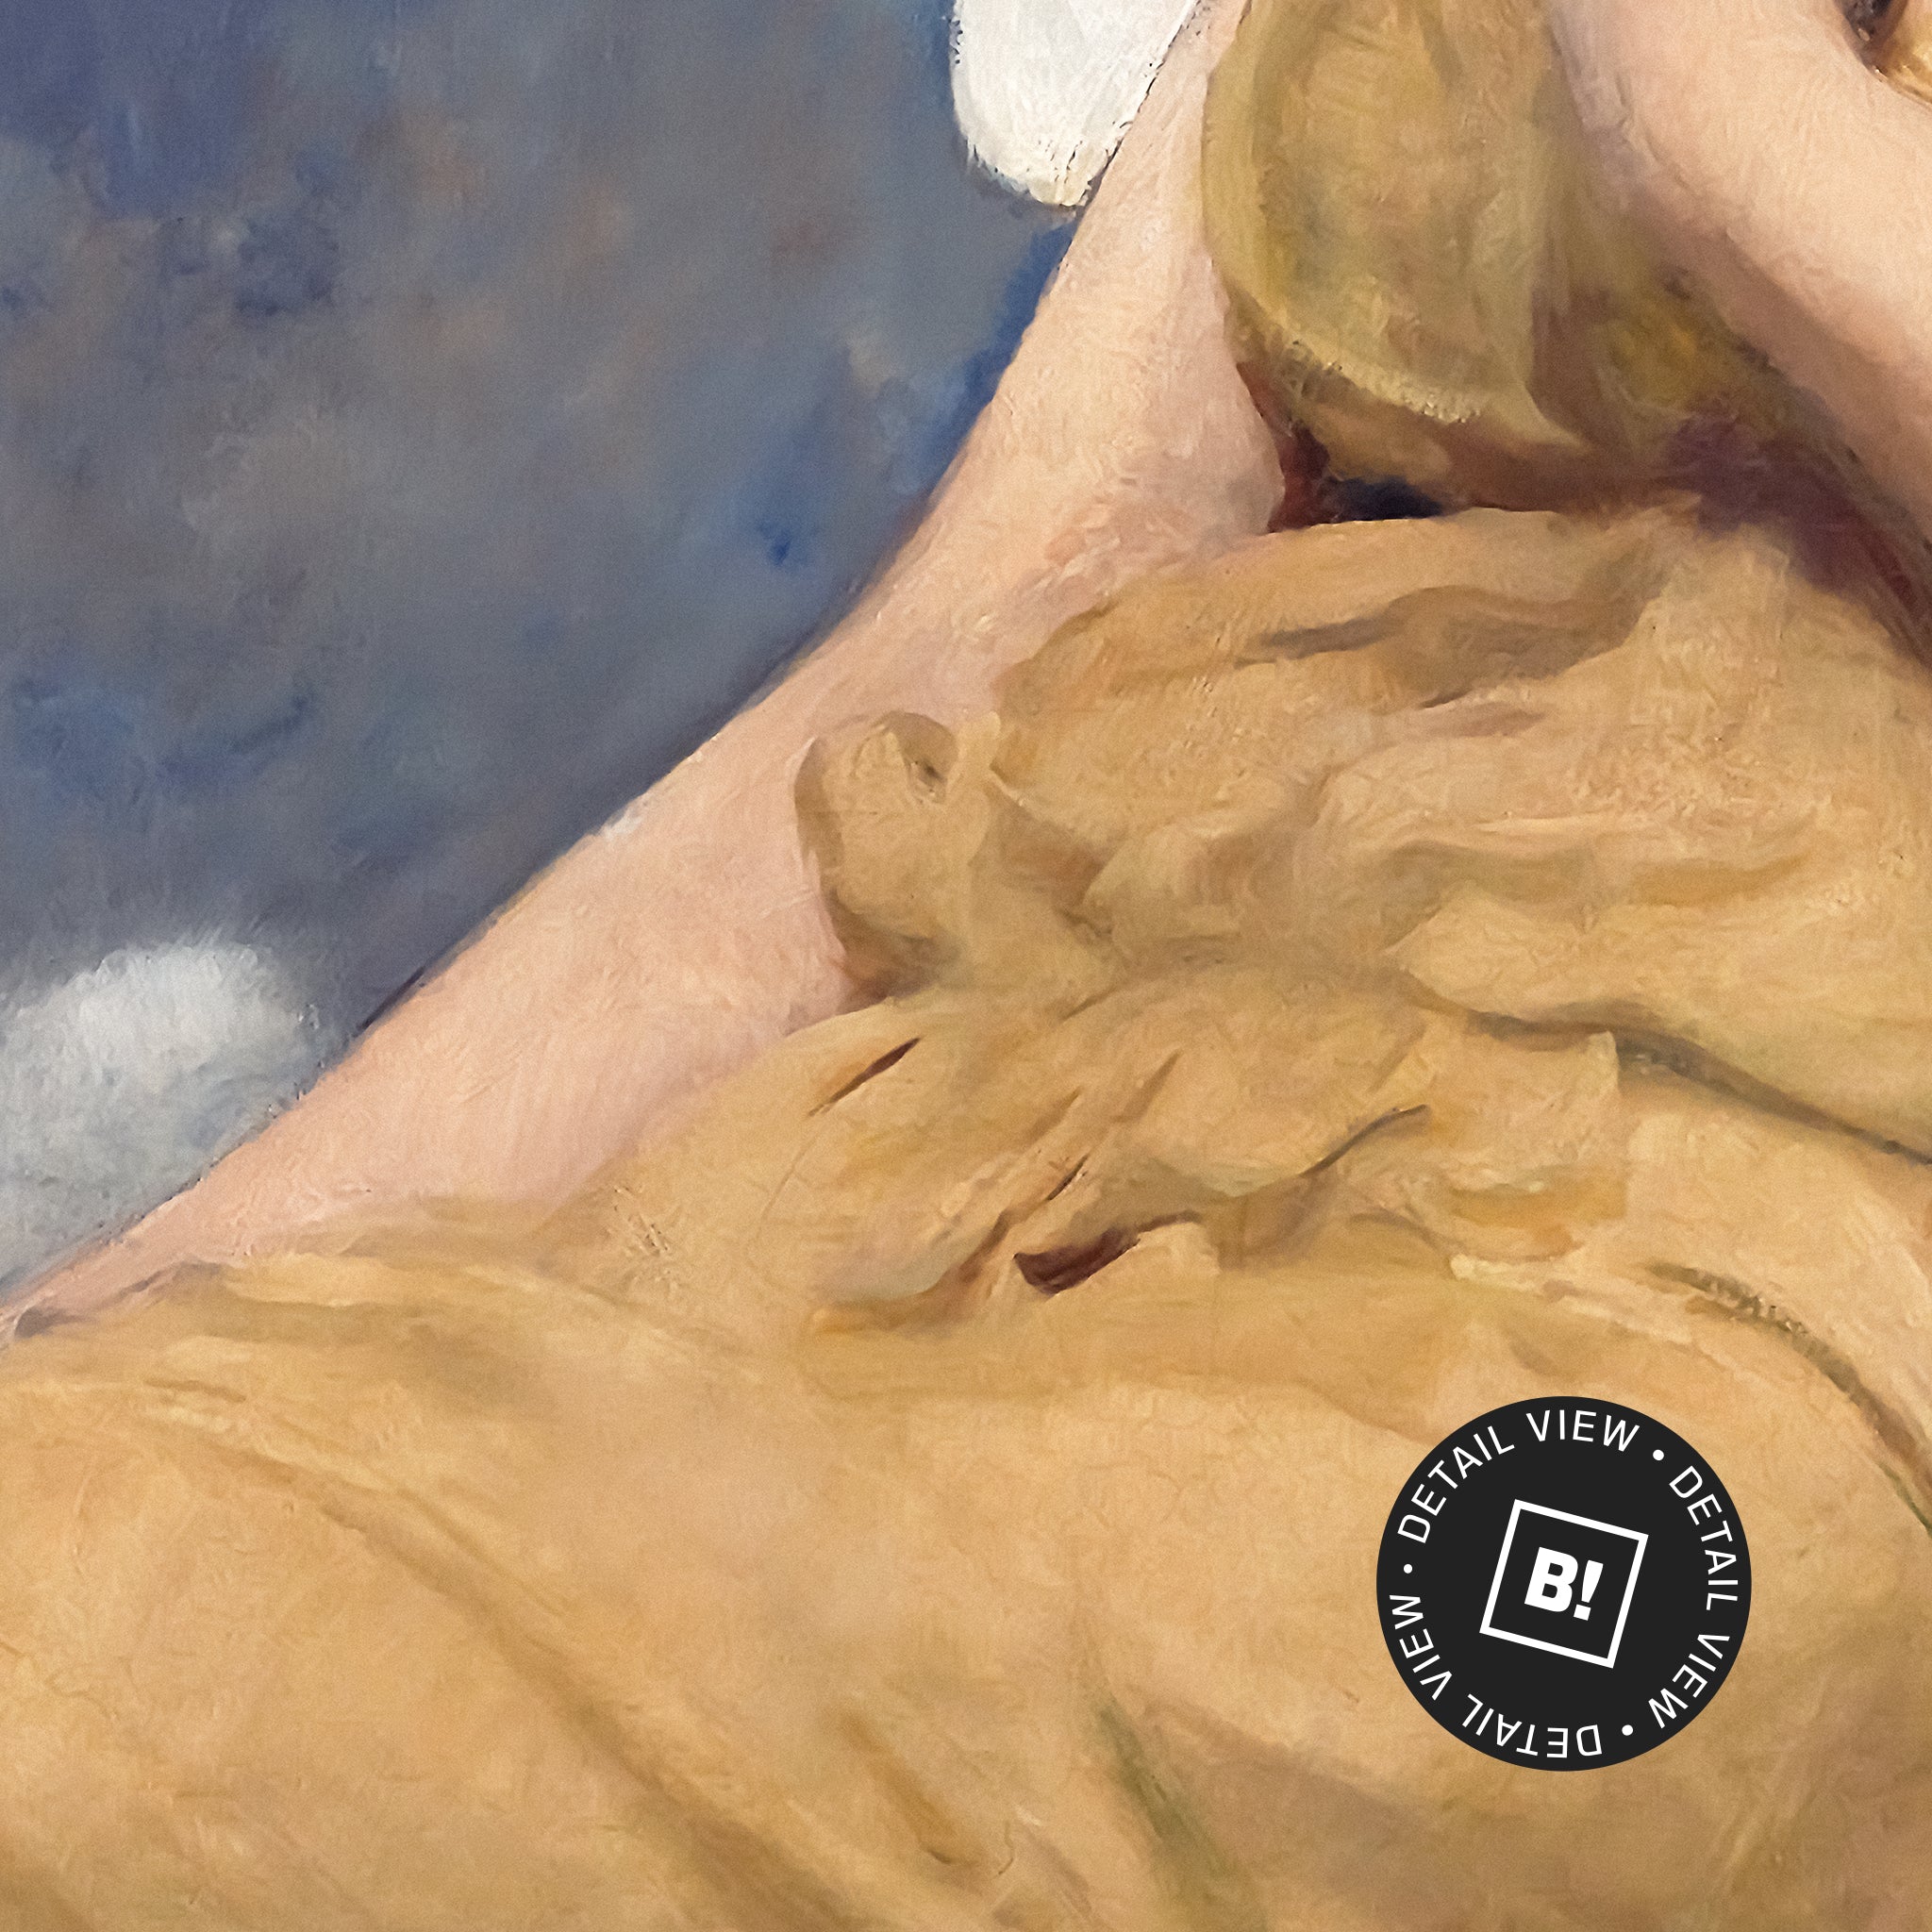 A close-up of Binspired's classic art print Winged Figure by Abbott Handerson Thayer. This artwork was printed using the giclée process on archival acid-free paper and shows its timeless beauty in every detail.